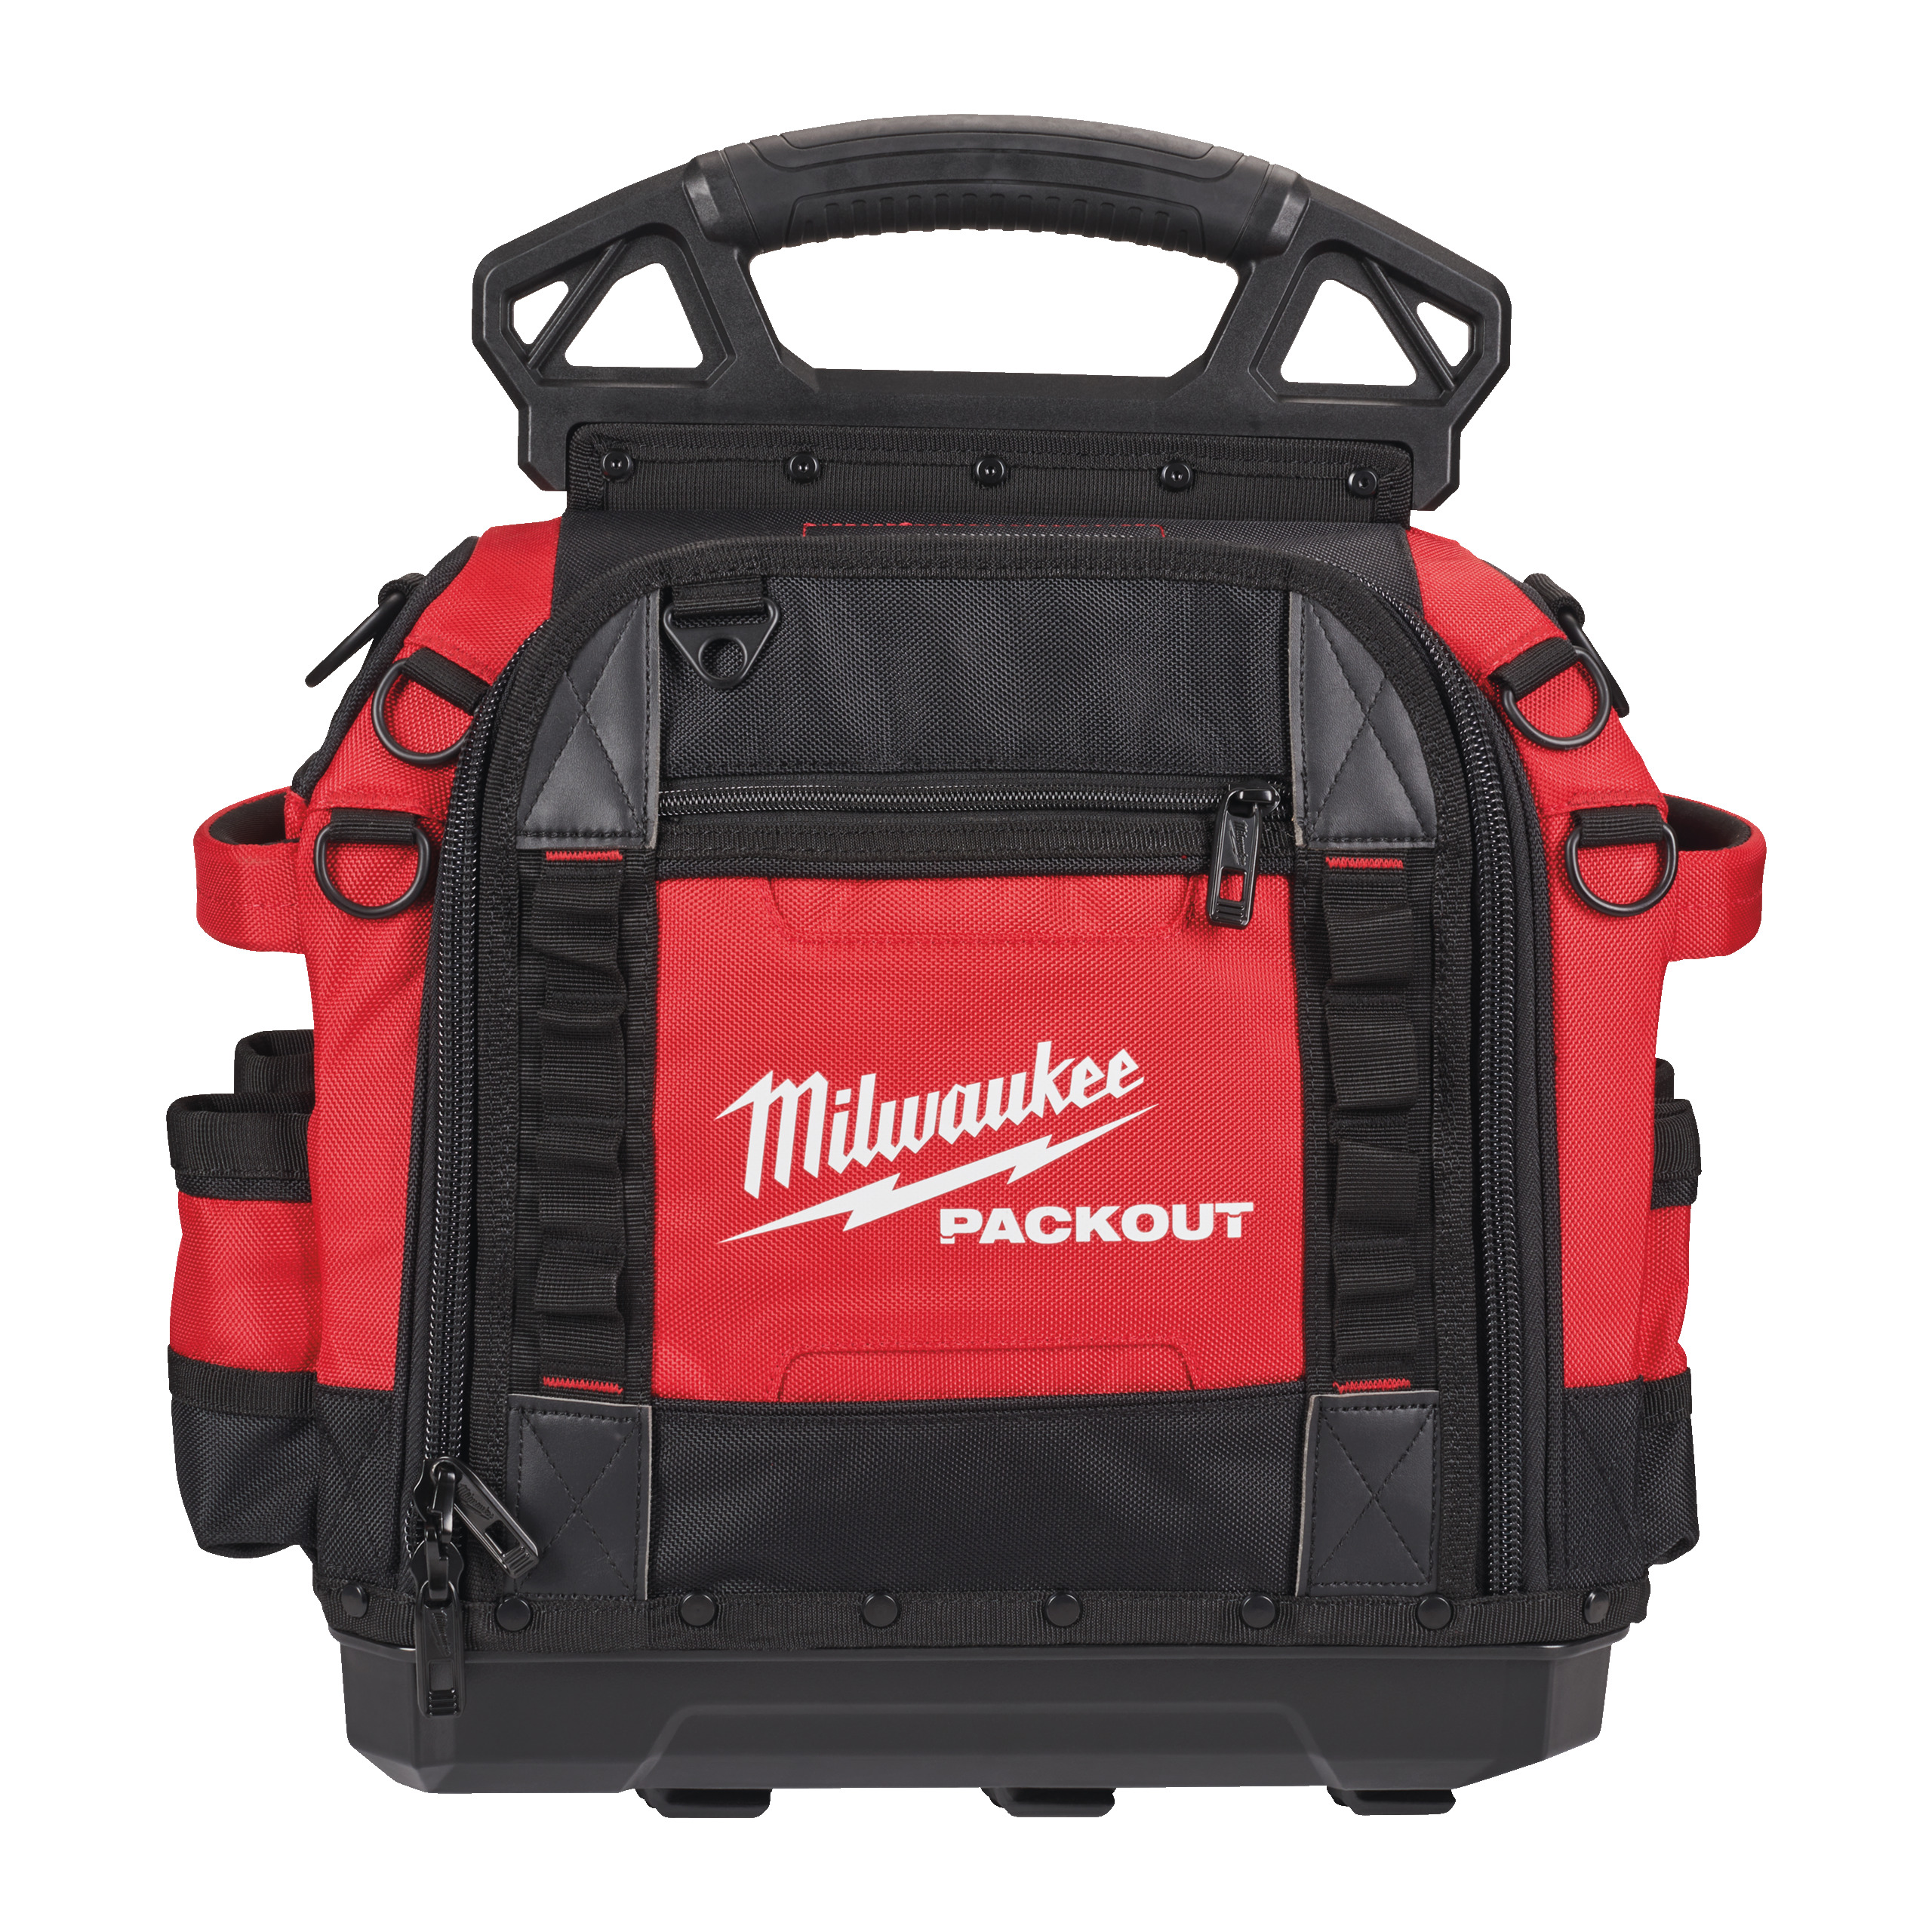 Milwaukee Packout 38 cm Closed Tote Tool Bag 4932493623